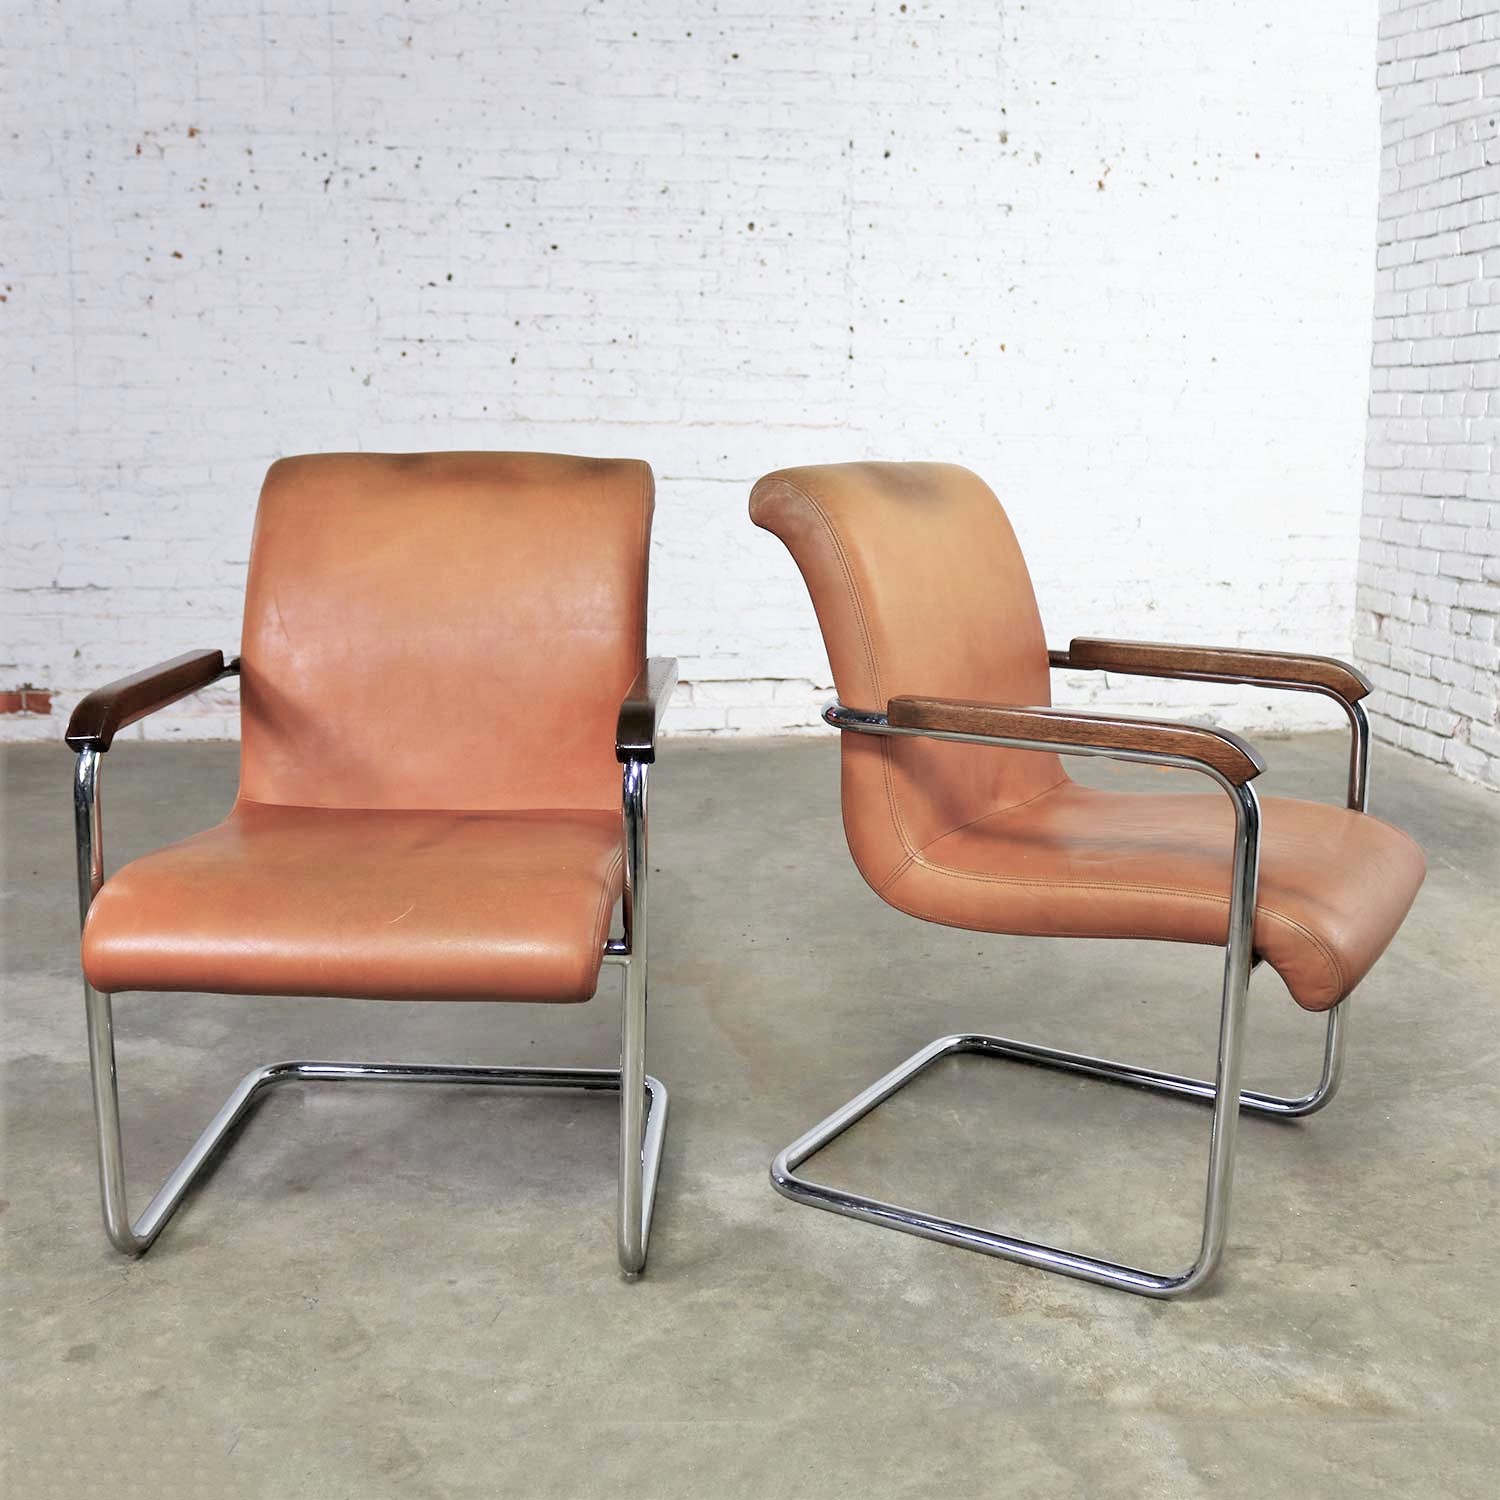 Interiors International Ltd. Cantilevered Chrome and Cognac Leather Chairs by John Geiger